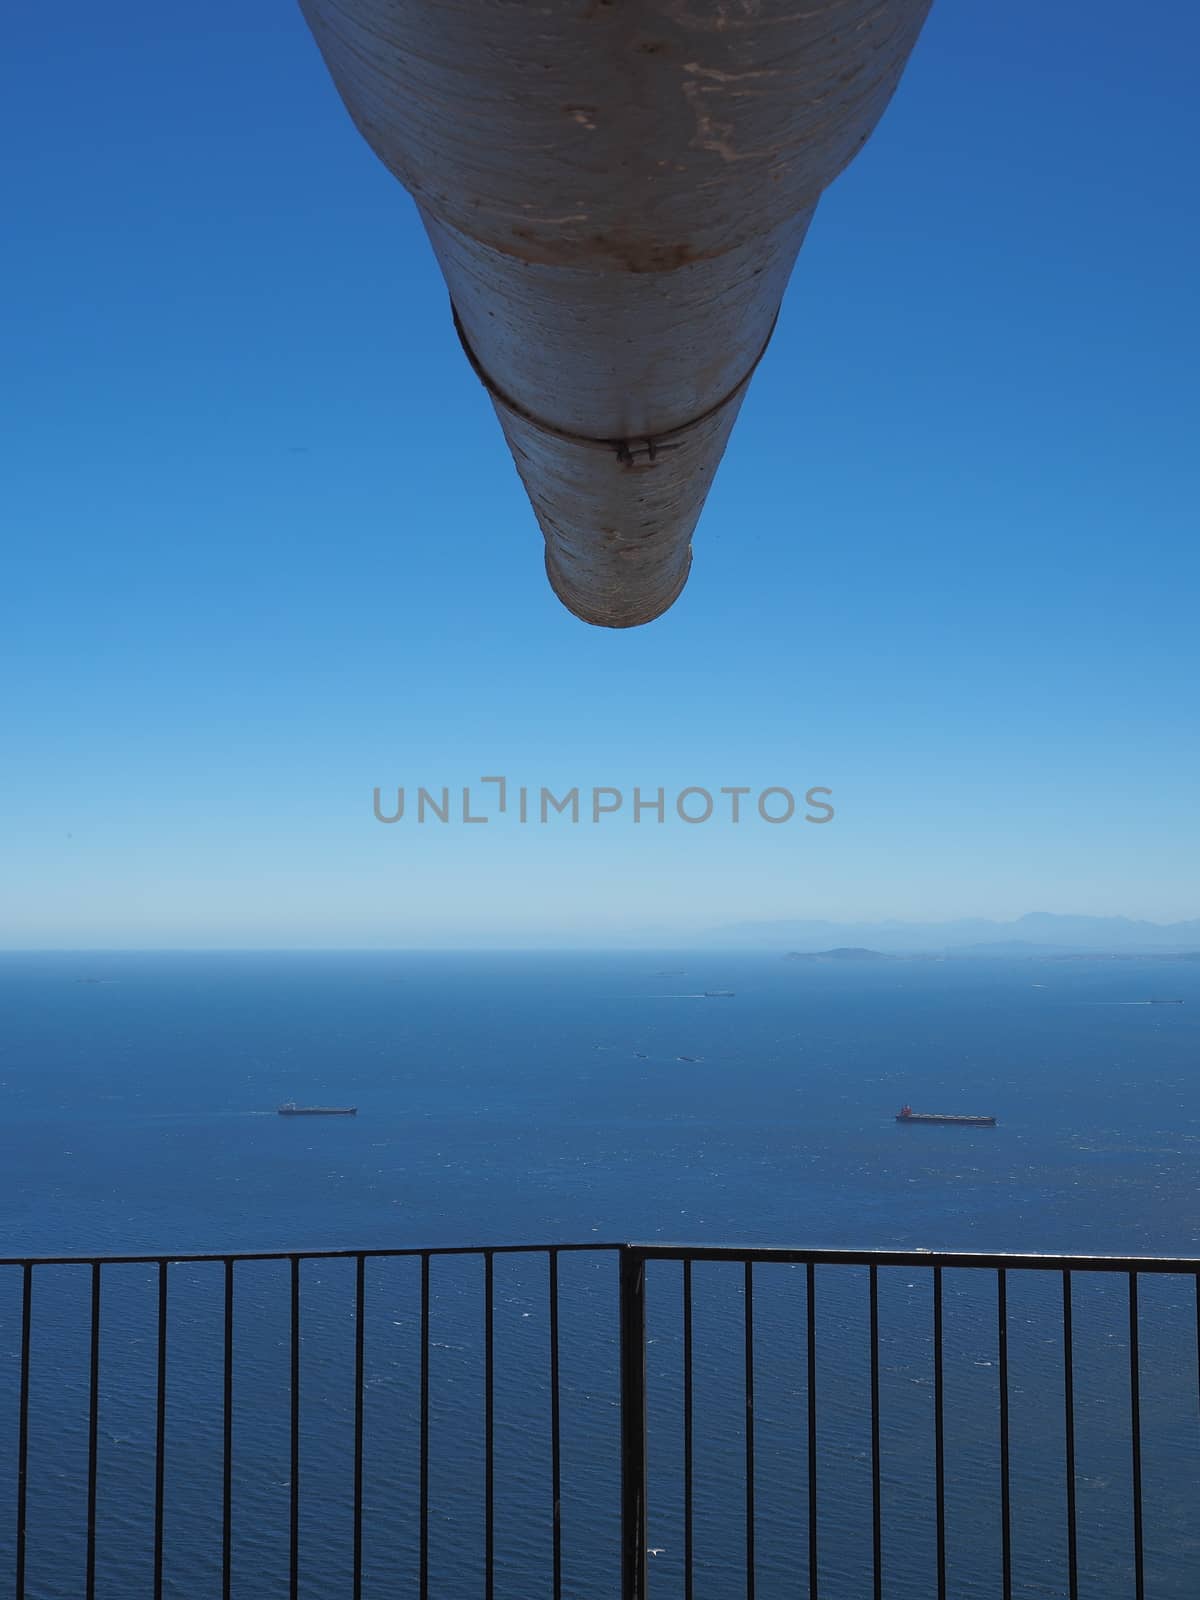 Looking down a gun barrel across the Strait of Gibraltar with the coast of Morocco in the distance